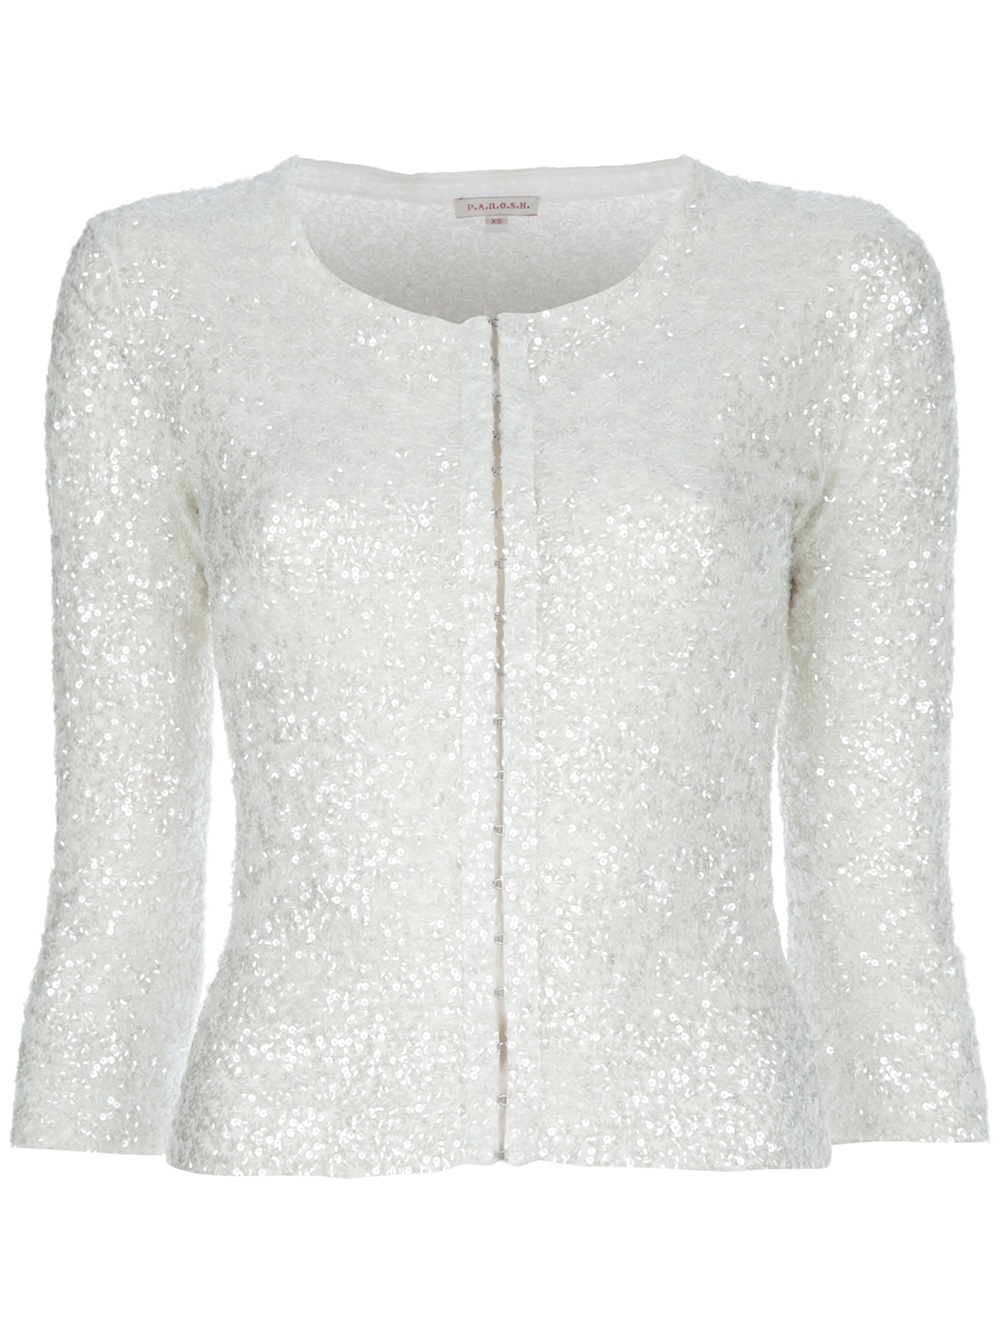 P.a.r.o.s.h. Sequin Cardigan in White | Lyst